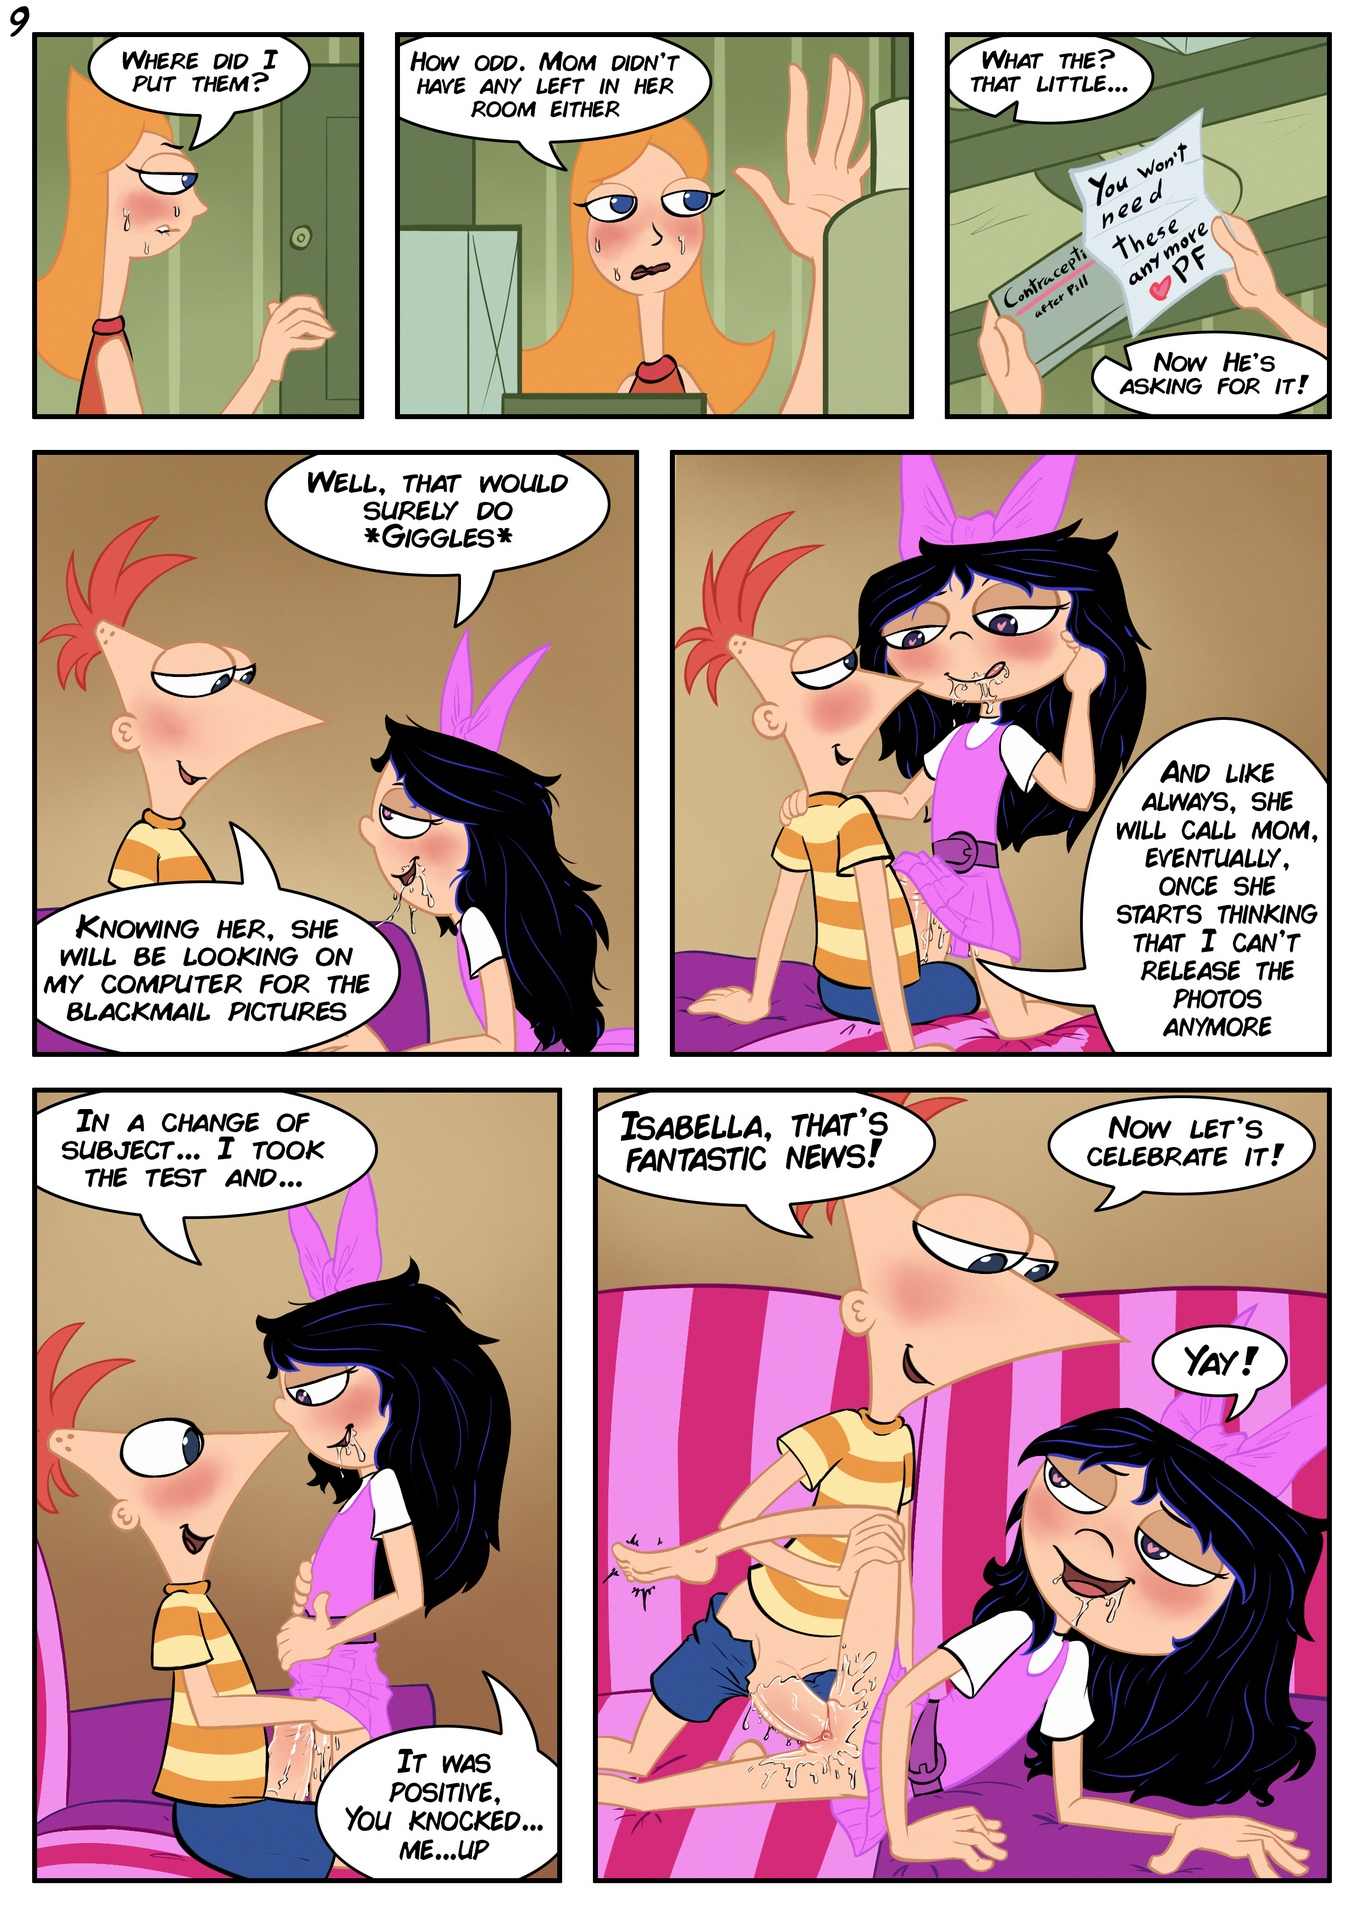 Phineas's Revenge â€“ SoulCentinel - Comics Army